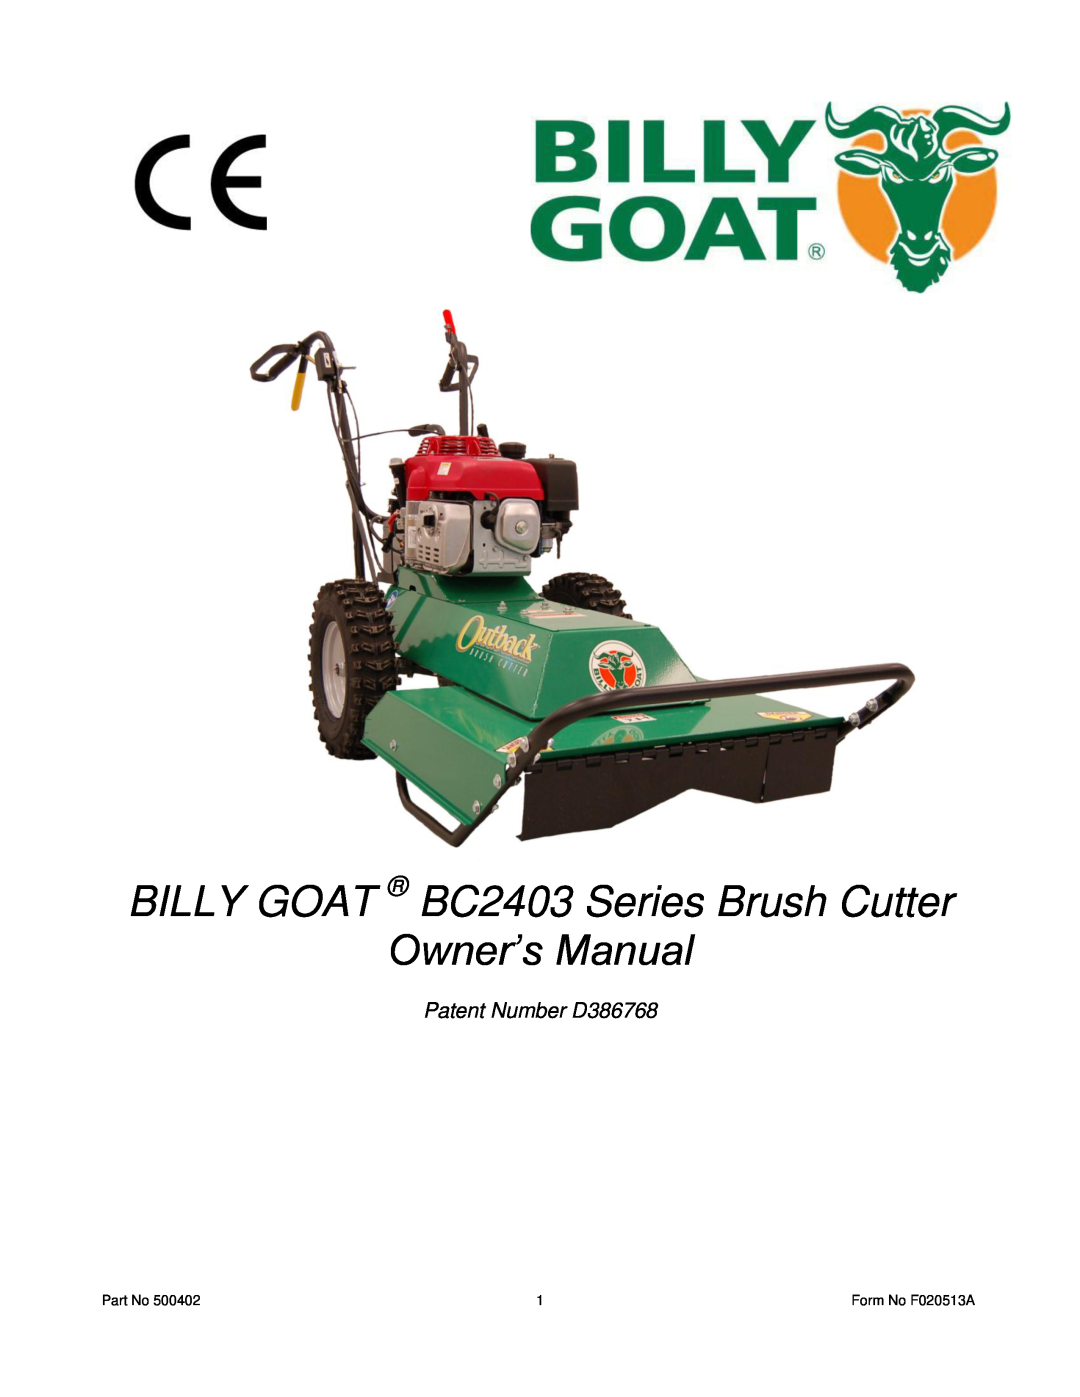 Billy Goat BC2403 owner manual Patent Number D386768 